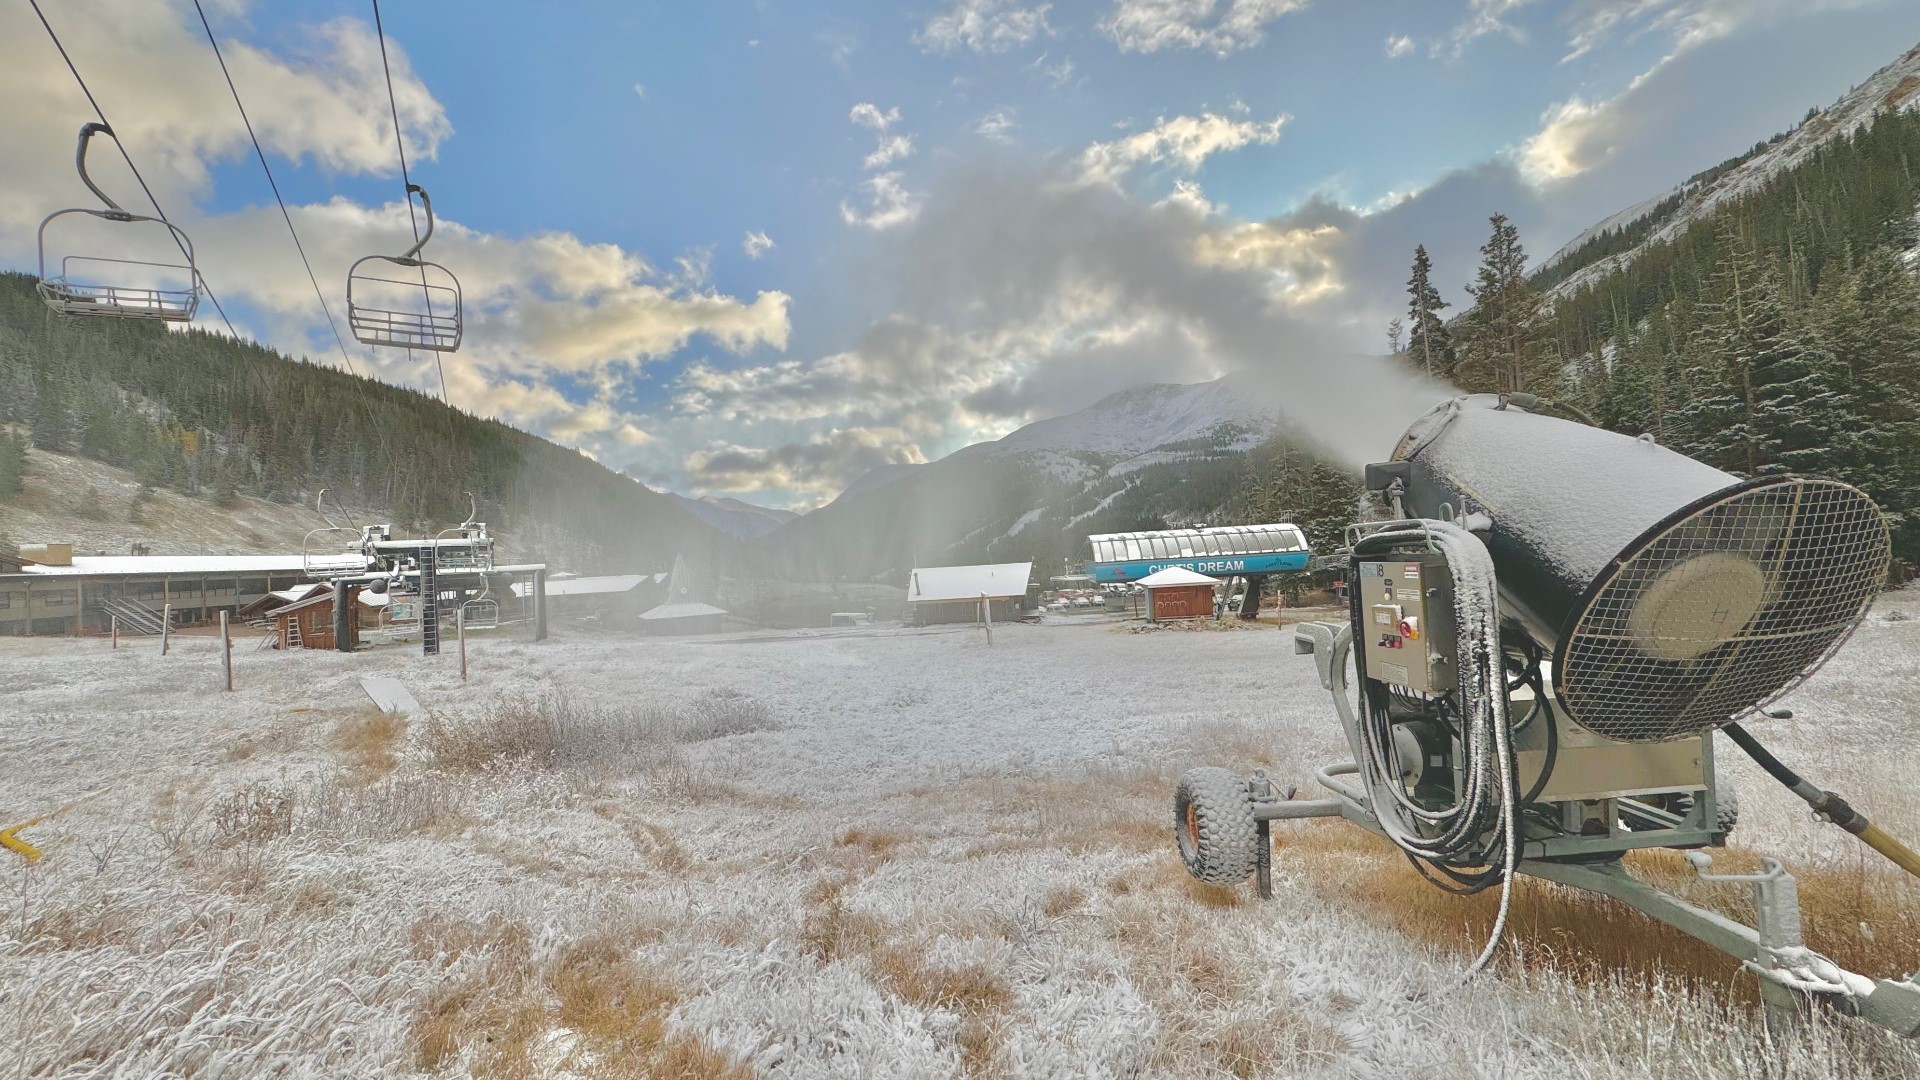 Loveland Ski Area in Clear Creek County, Colorado, started making snow for the 2023/24 season.